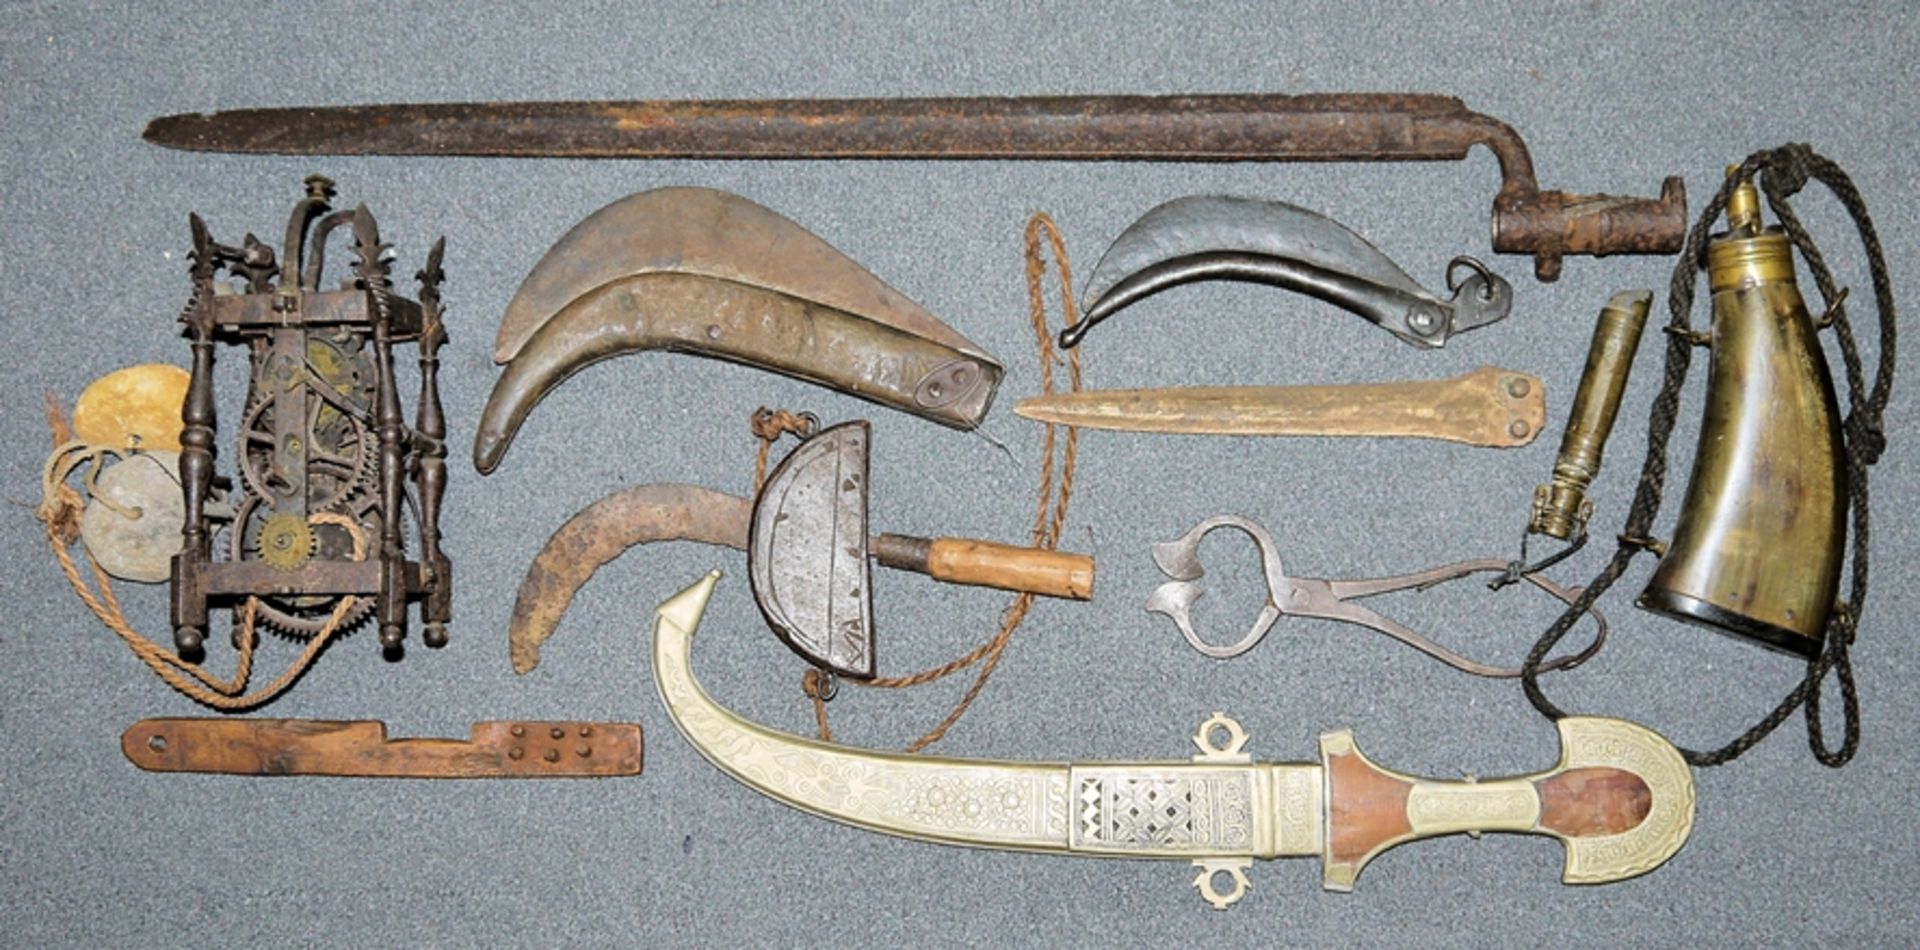 Collection of antique weapons, implements and a clockwork from the 18th century